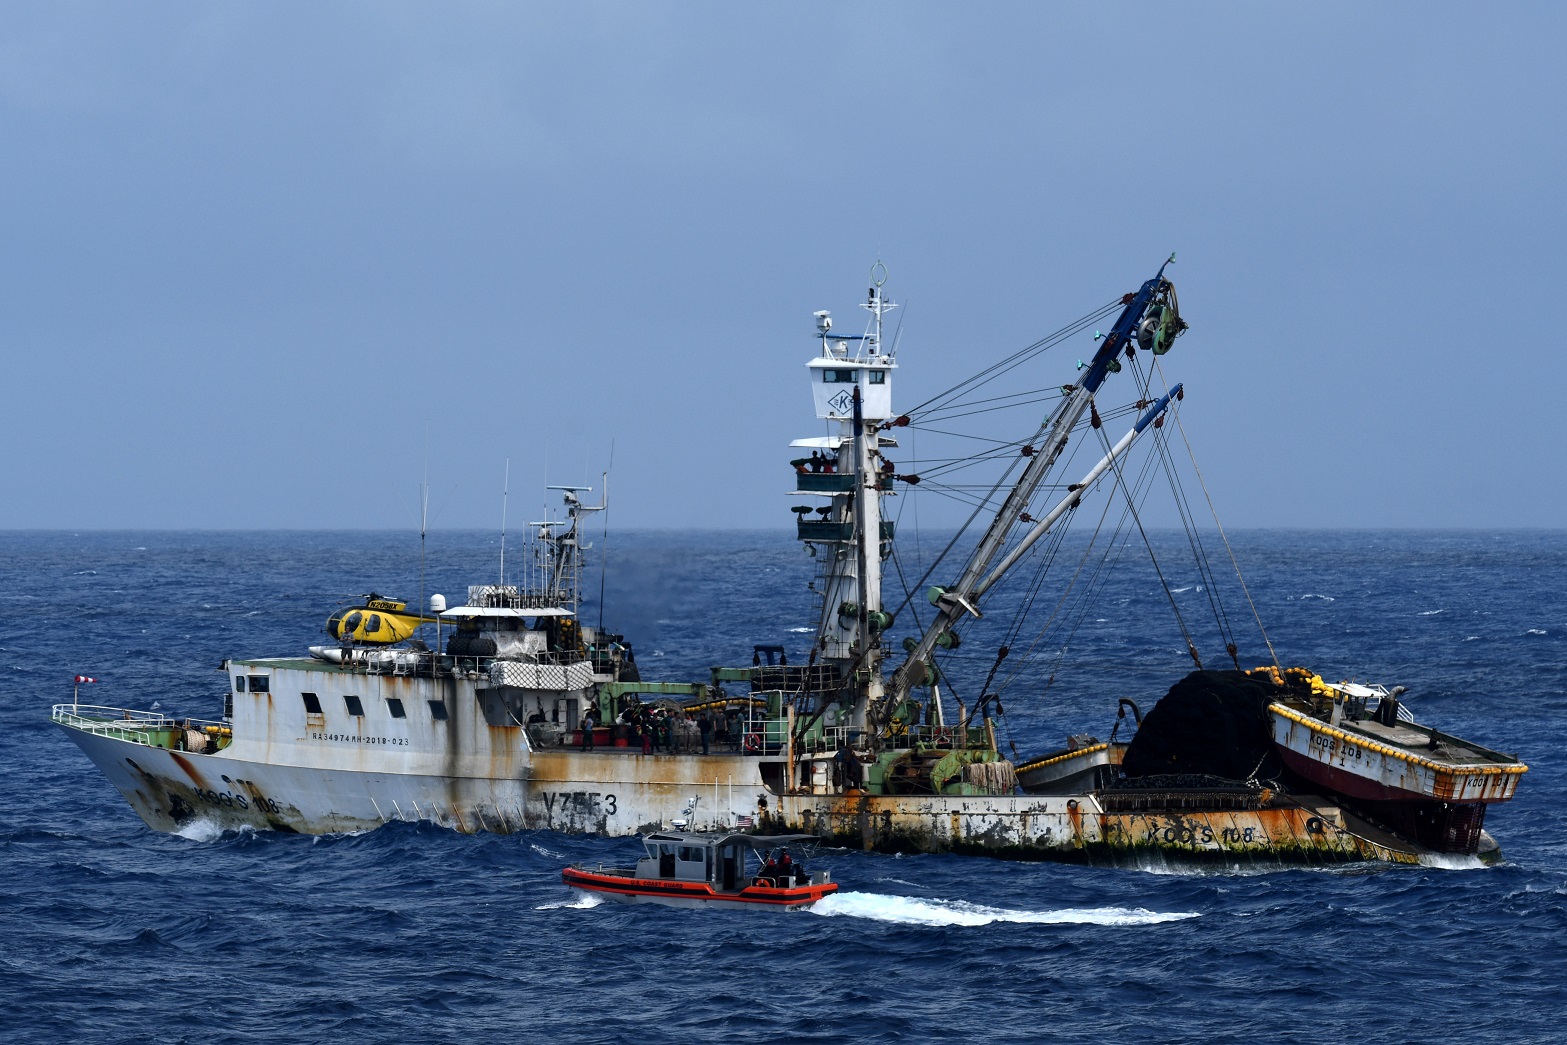 Representatives from SOUTHCOM, US Coast Guard, Attend IUU Fishing Conference